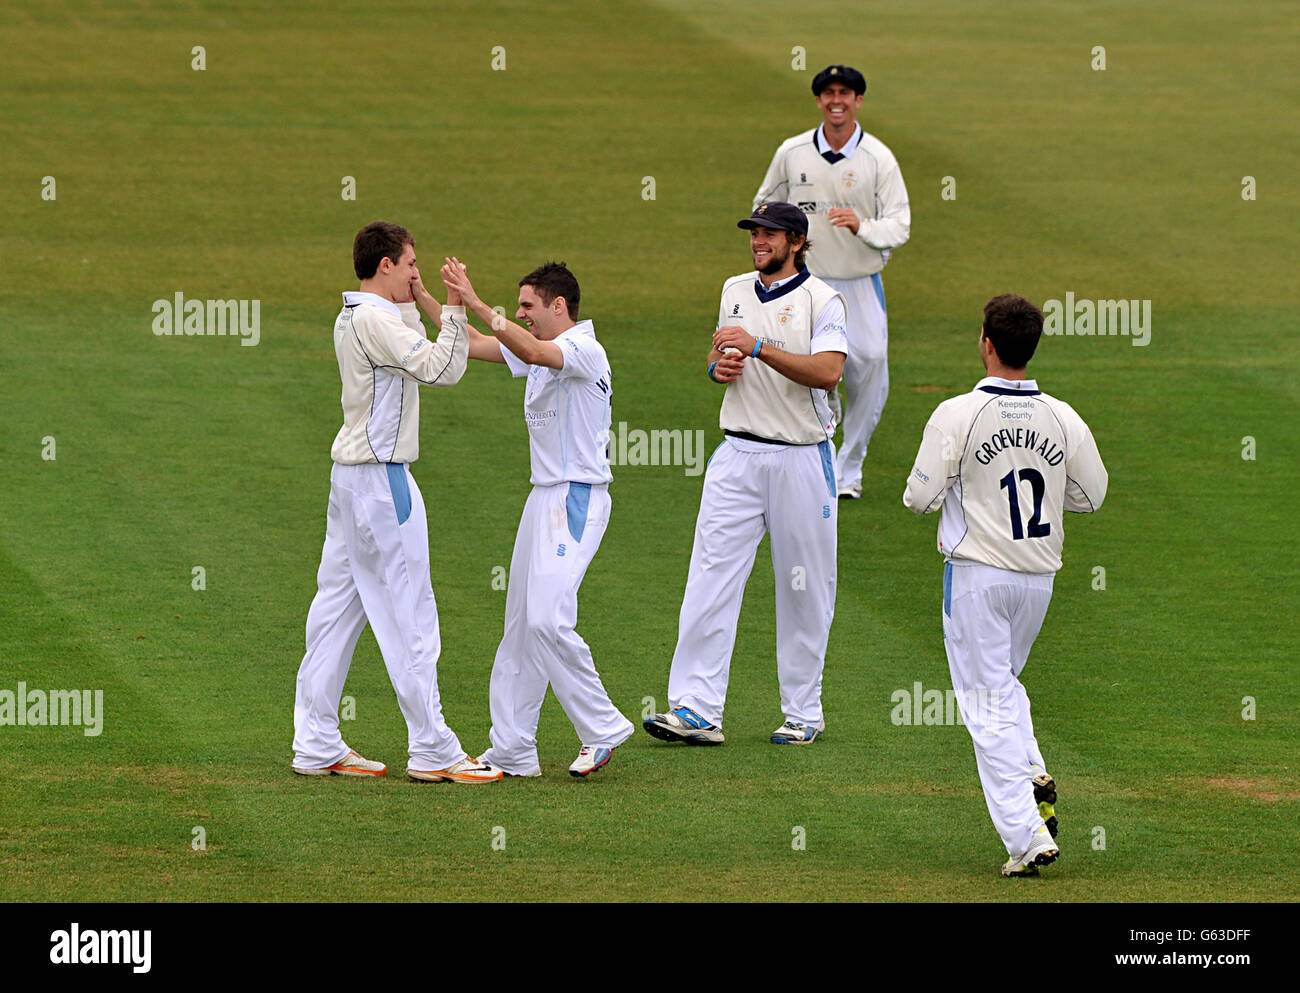 Derbyshire's David Wainwright (centre left) celebrates taking the wicket of Nottinghamshire's Ed Cowan, caught by Derbyshire's Greg Cork (left) during the LV= County Championship, Division One match at the County Ground, Derby. Stock Photo